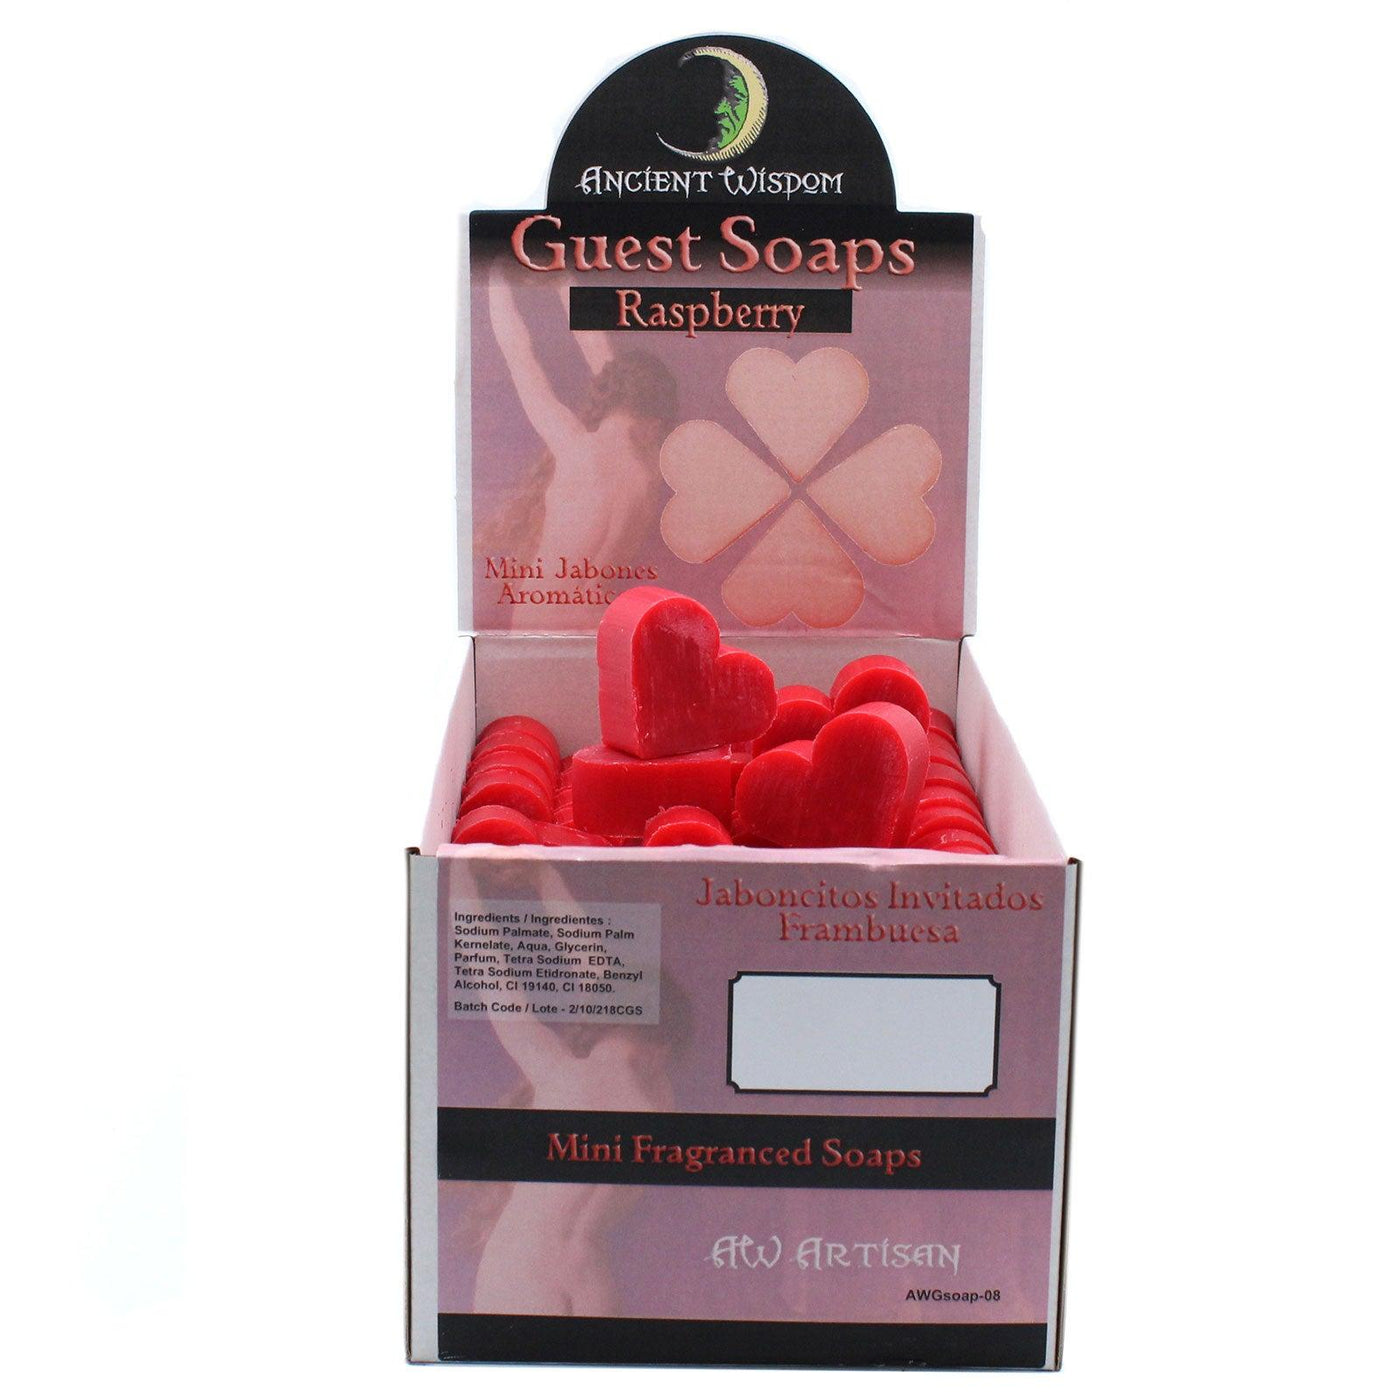 10x Red Heart Shaped Paraben Free Guest Soap - Raspberry.